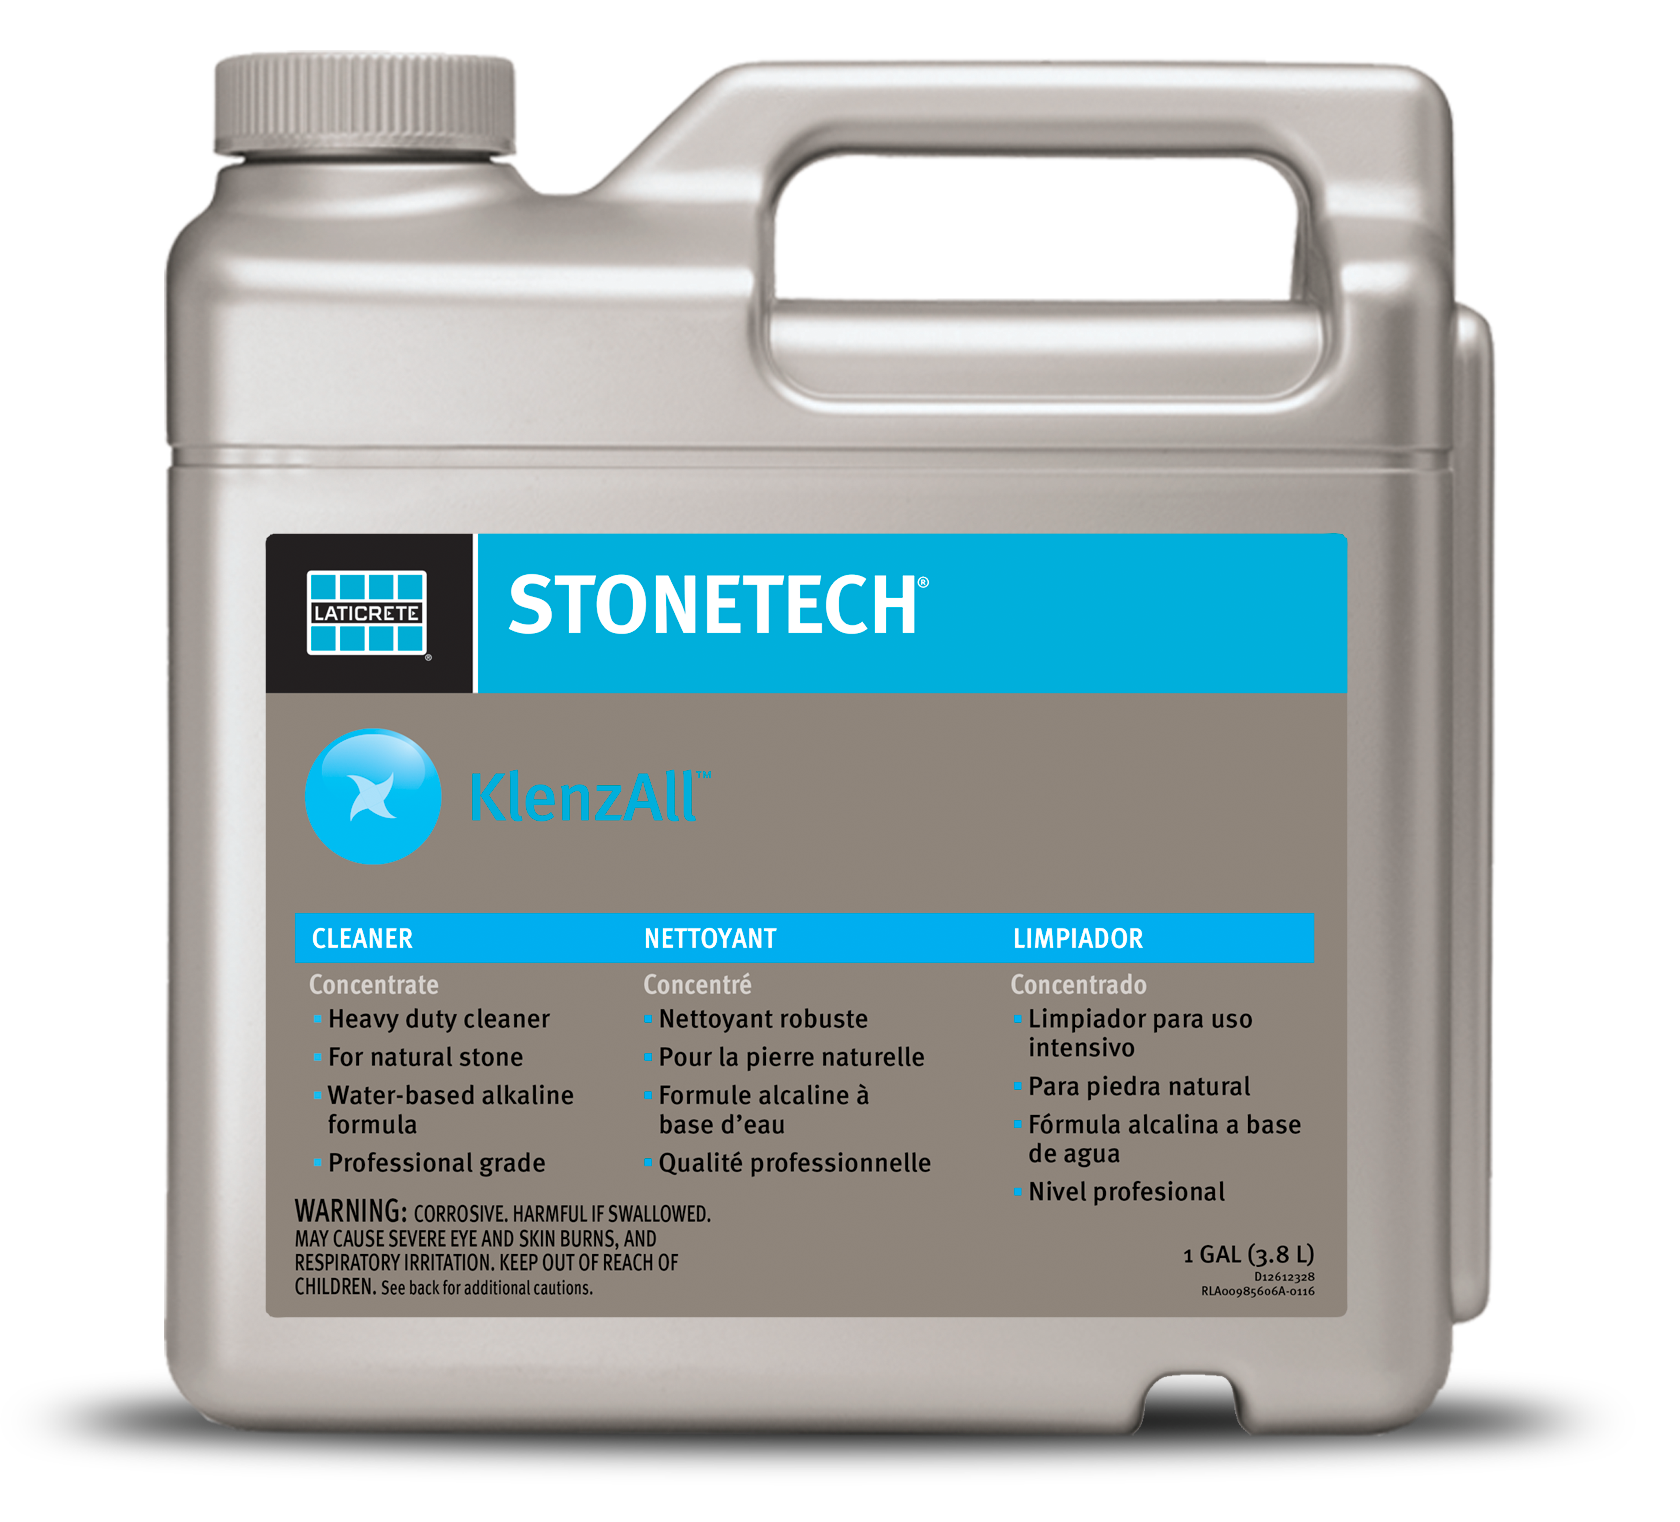 STONETECH® KlenzAll™ Cleaner